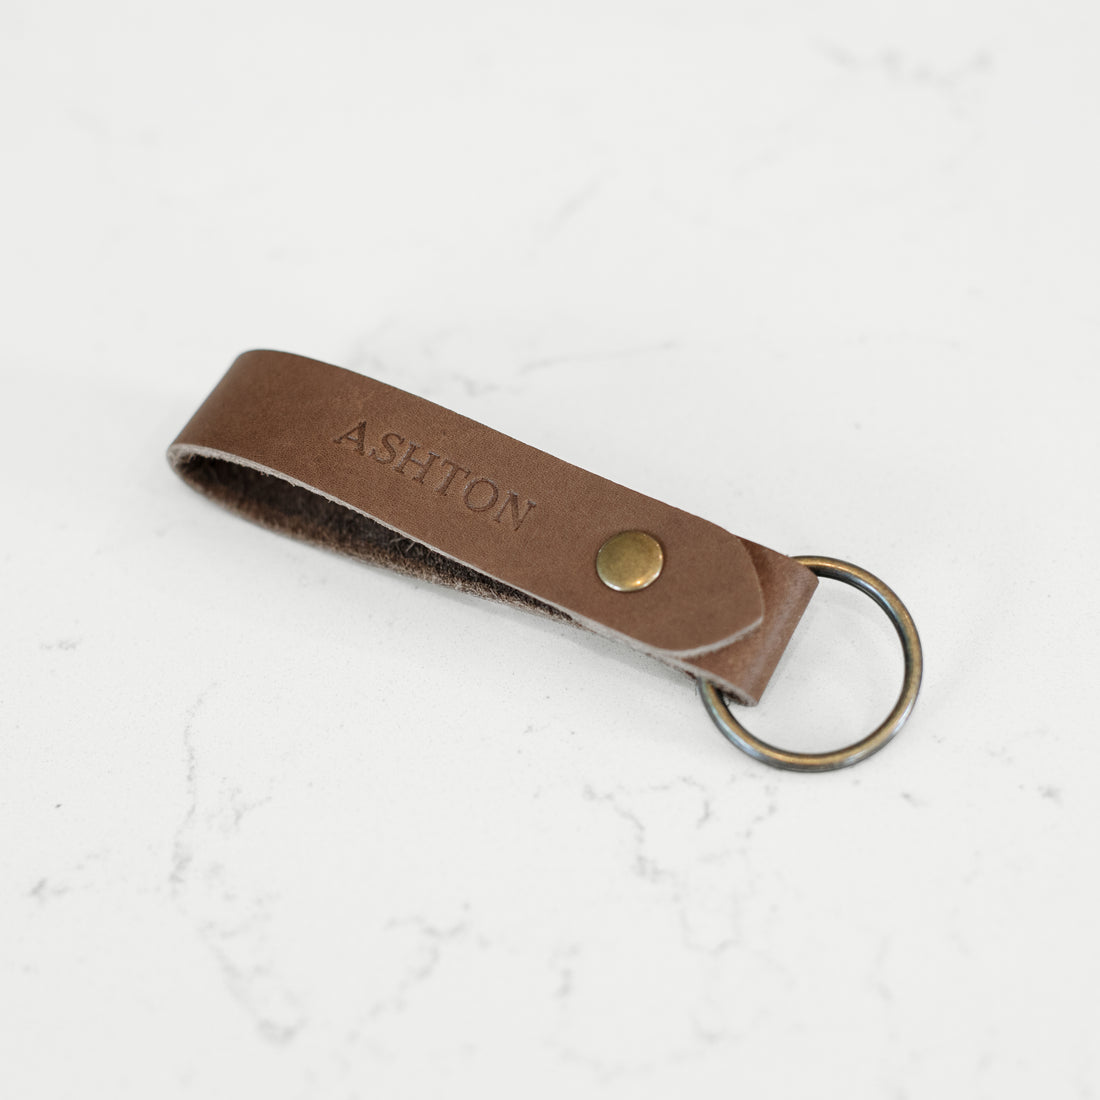 Personalized Leather Wallet Monogram Keychain Tan Leather 